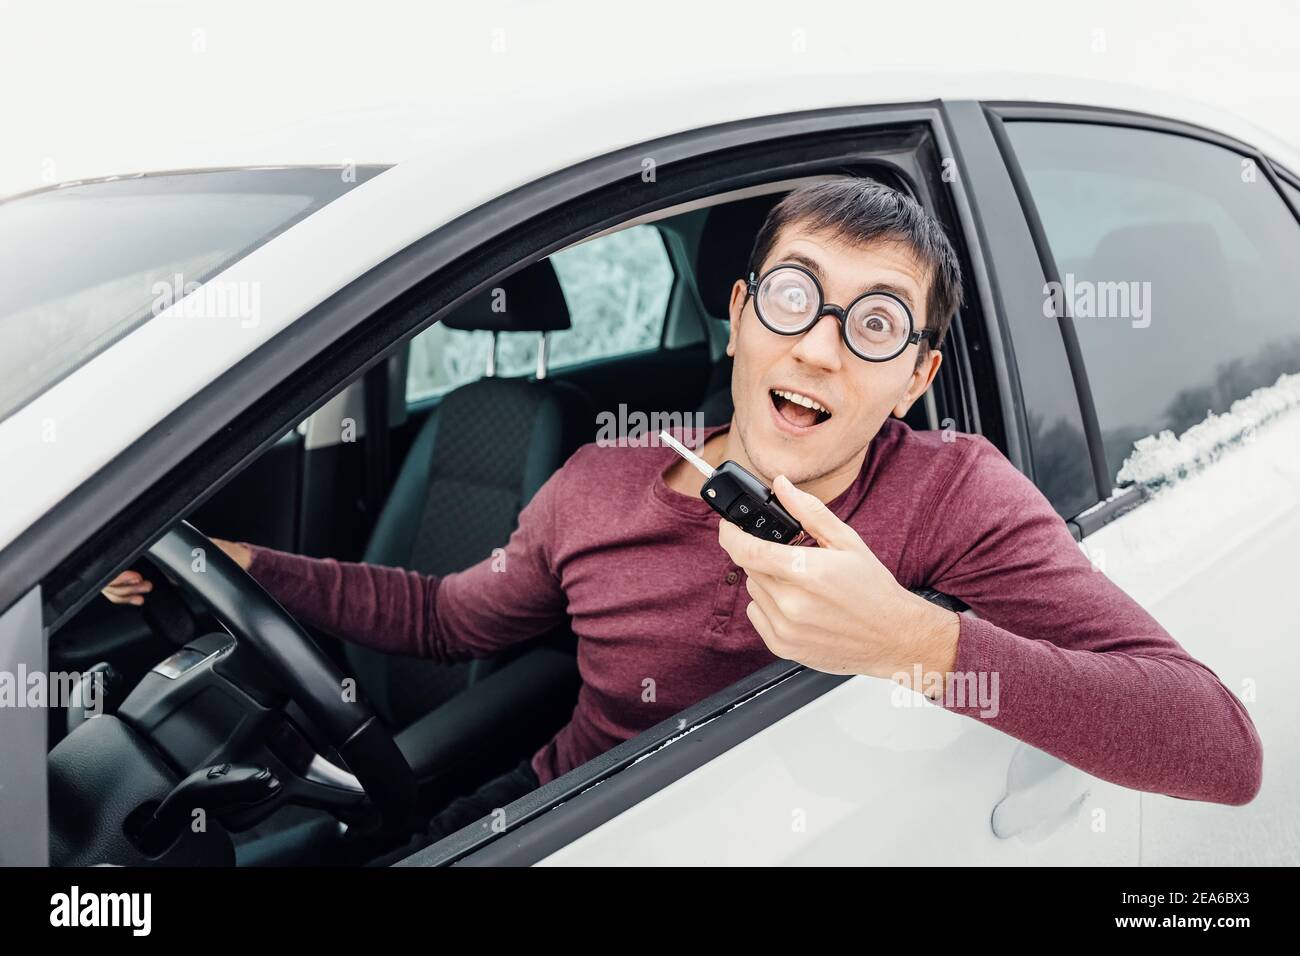 Funny driver in eye glasses holding the car key and smiling to the camera. Concept of a newbie driver and insurance Stock Photo